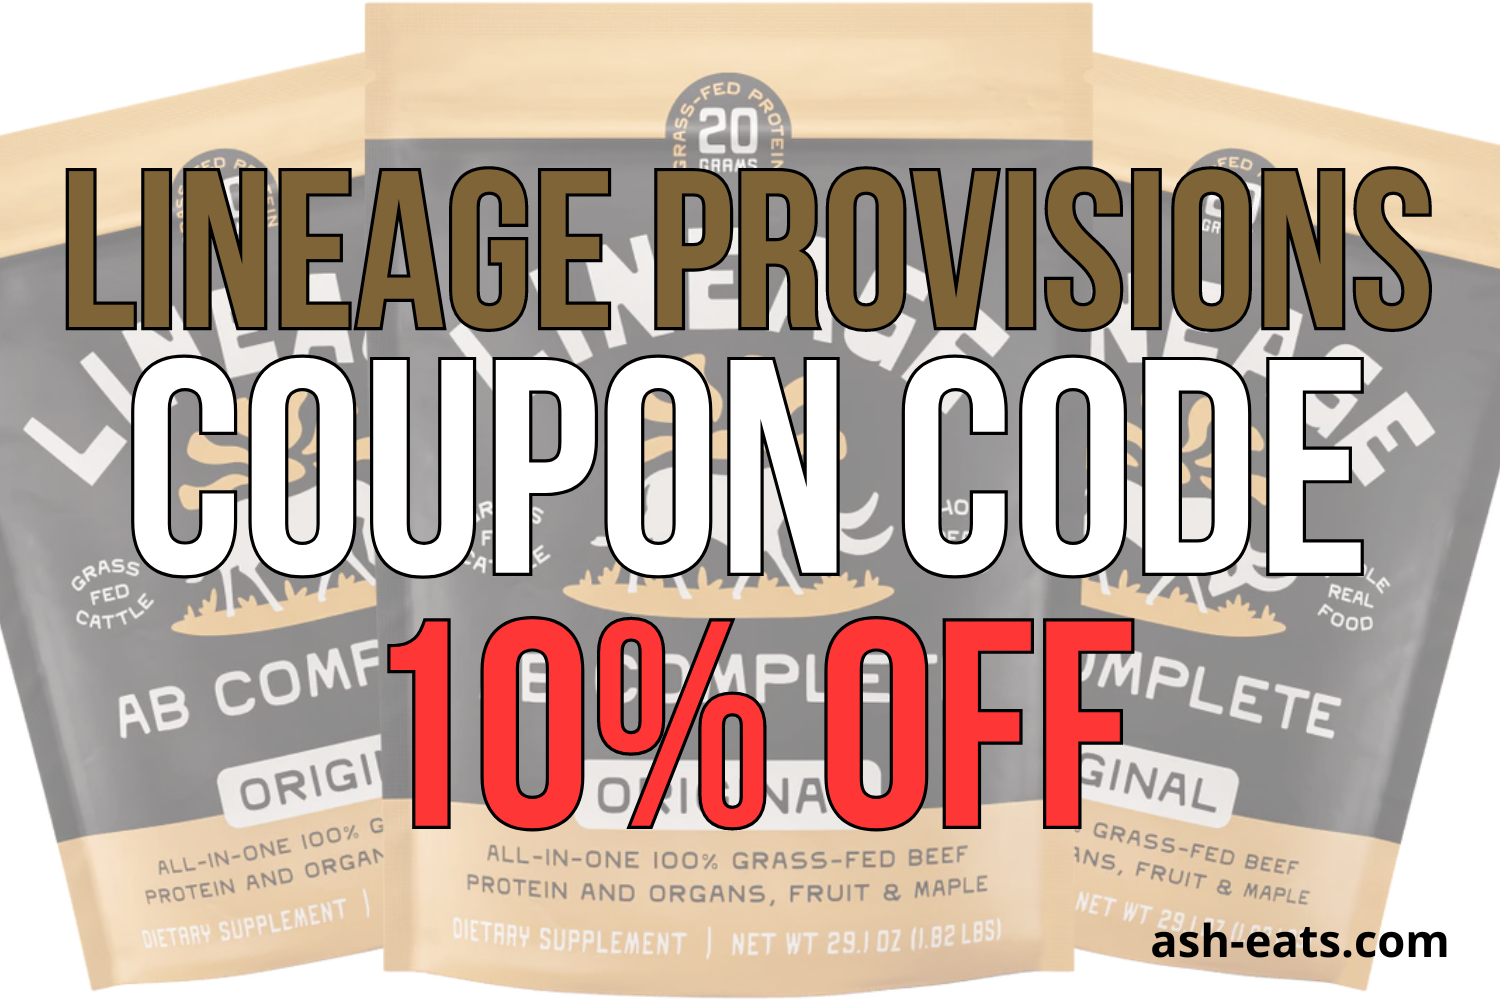 lineage provisions coupon code